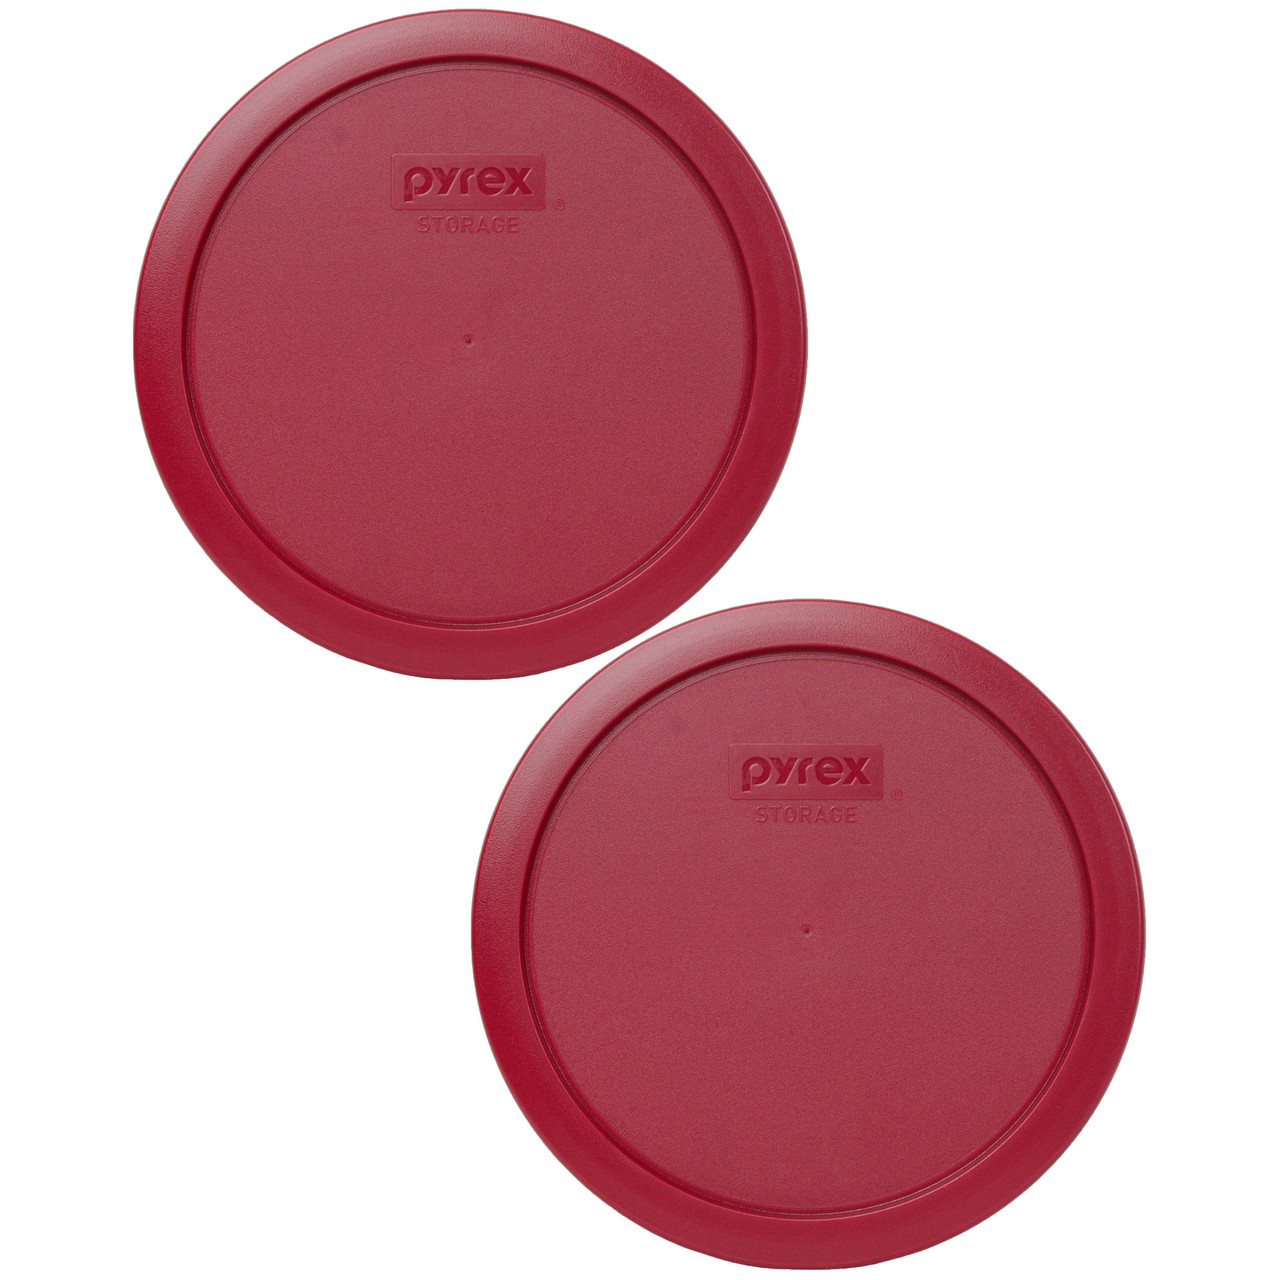 Pyrex 7203 7-Cup Round Glass Food Storage Bowl and 7402-PC Red